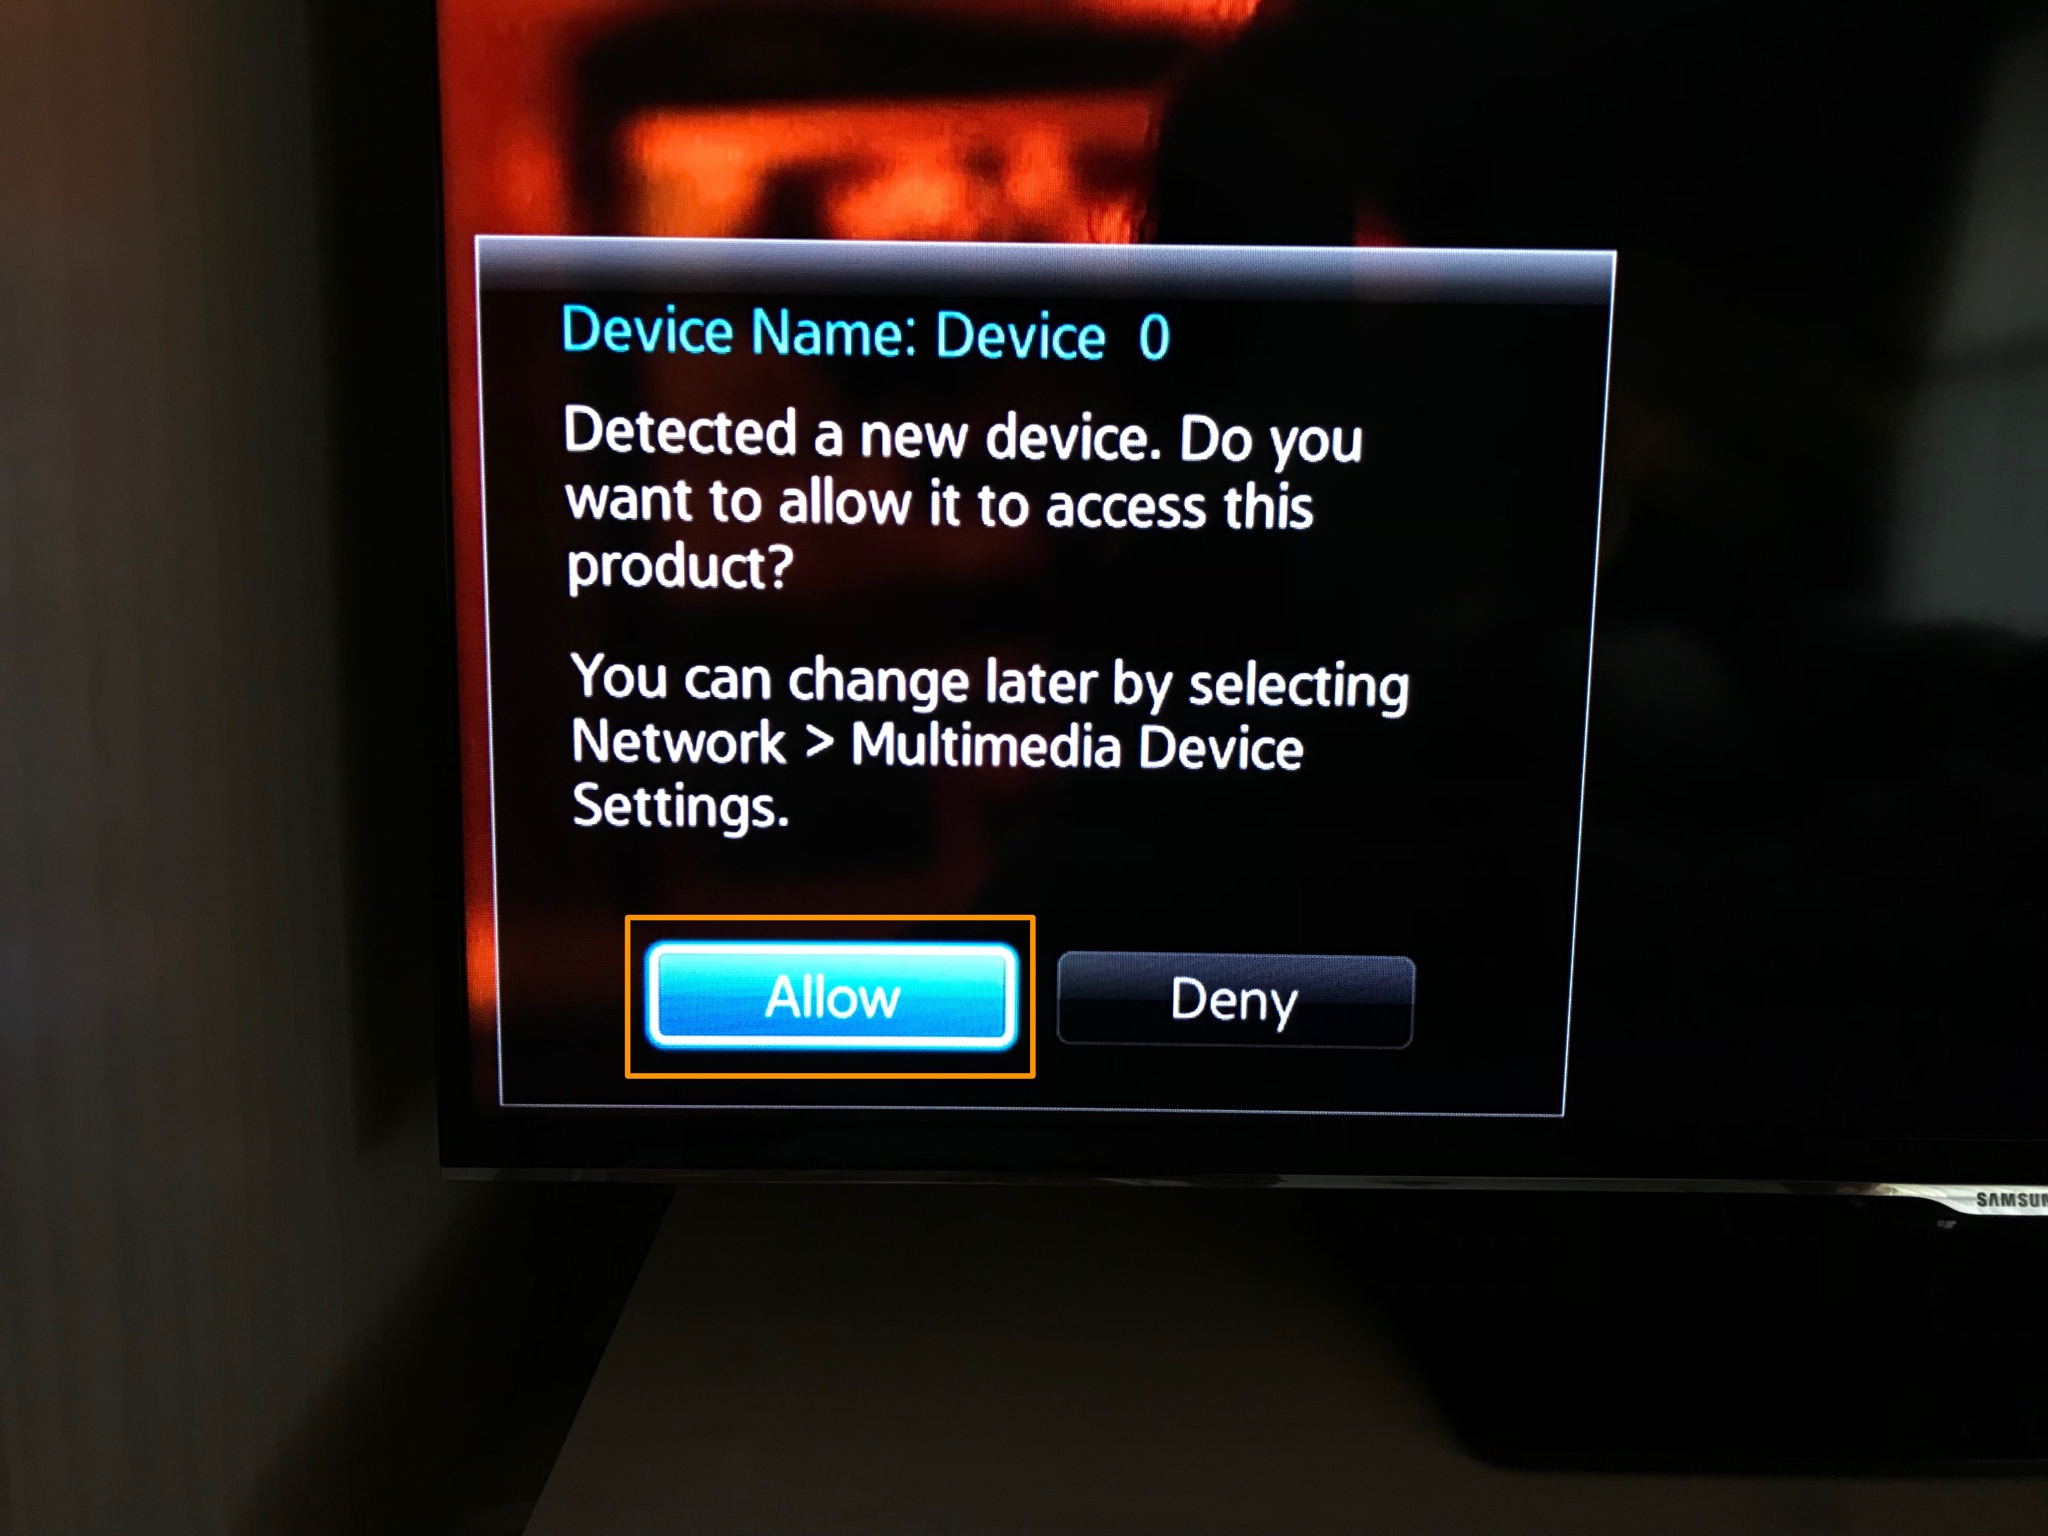 Mirror Your Iphone Or Ipad On A Smart Tv, How Do I Mirror My Ipad To Samsung Tv